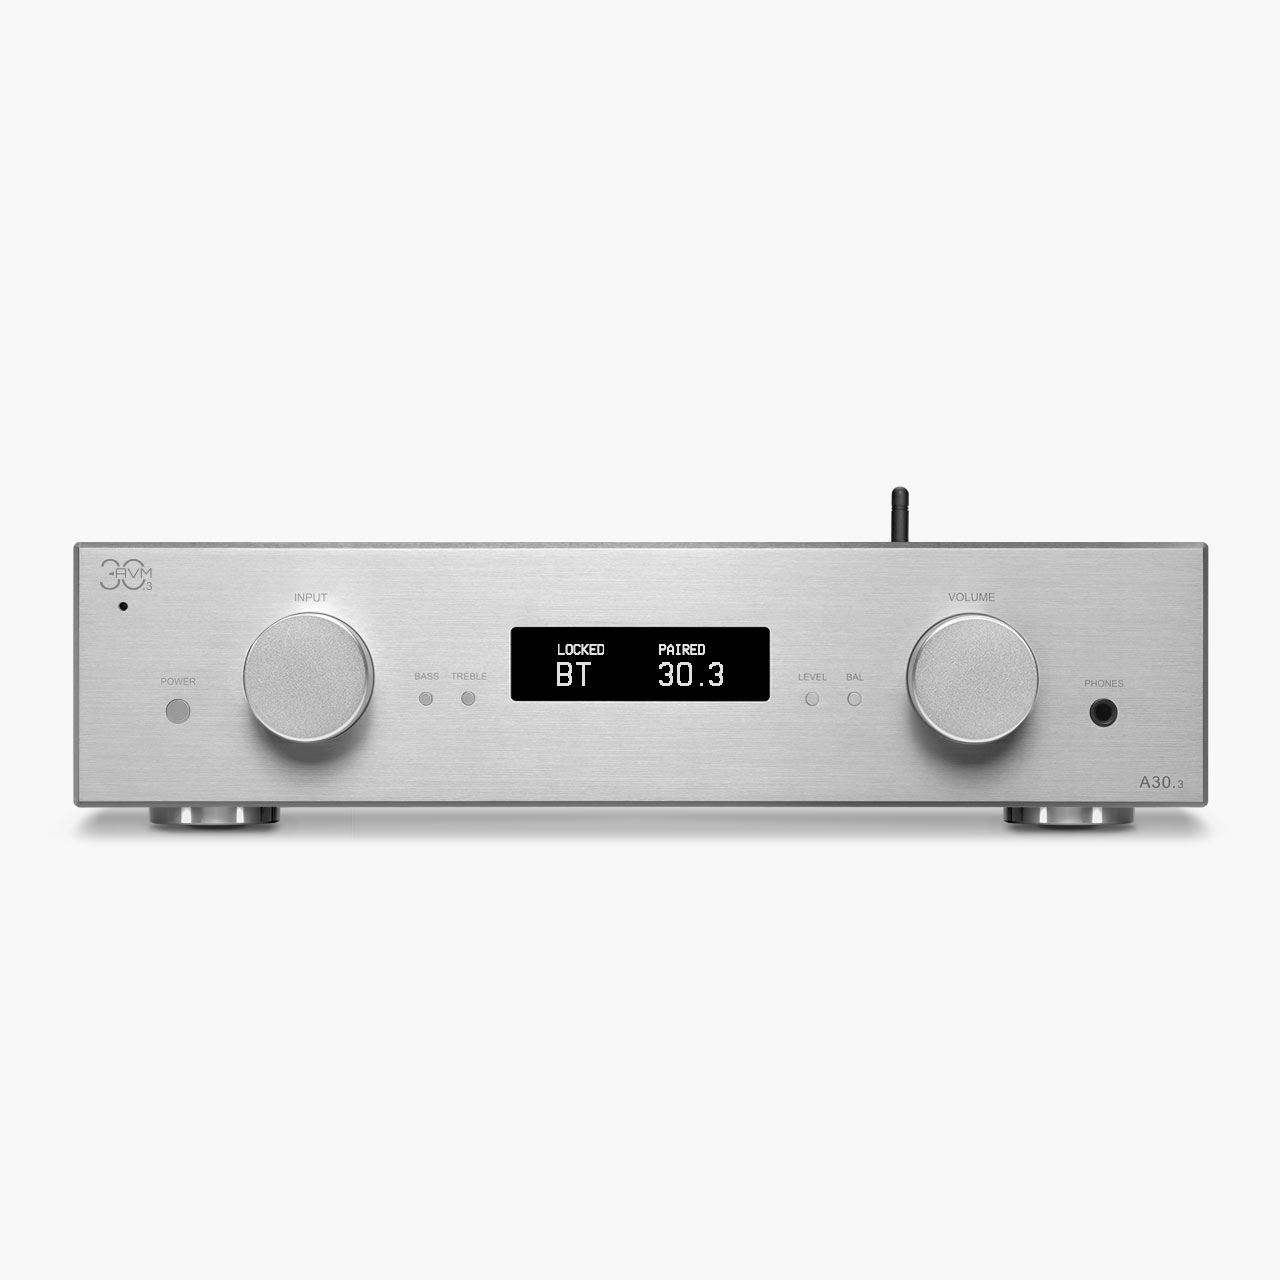 First Look: The AVM 30.3 Integrated Amplifier